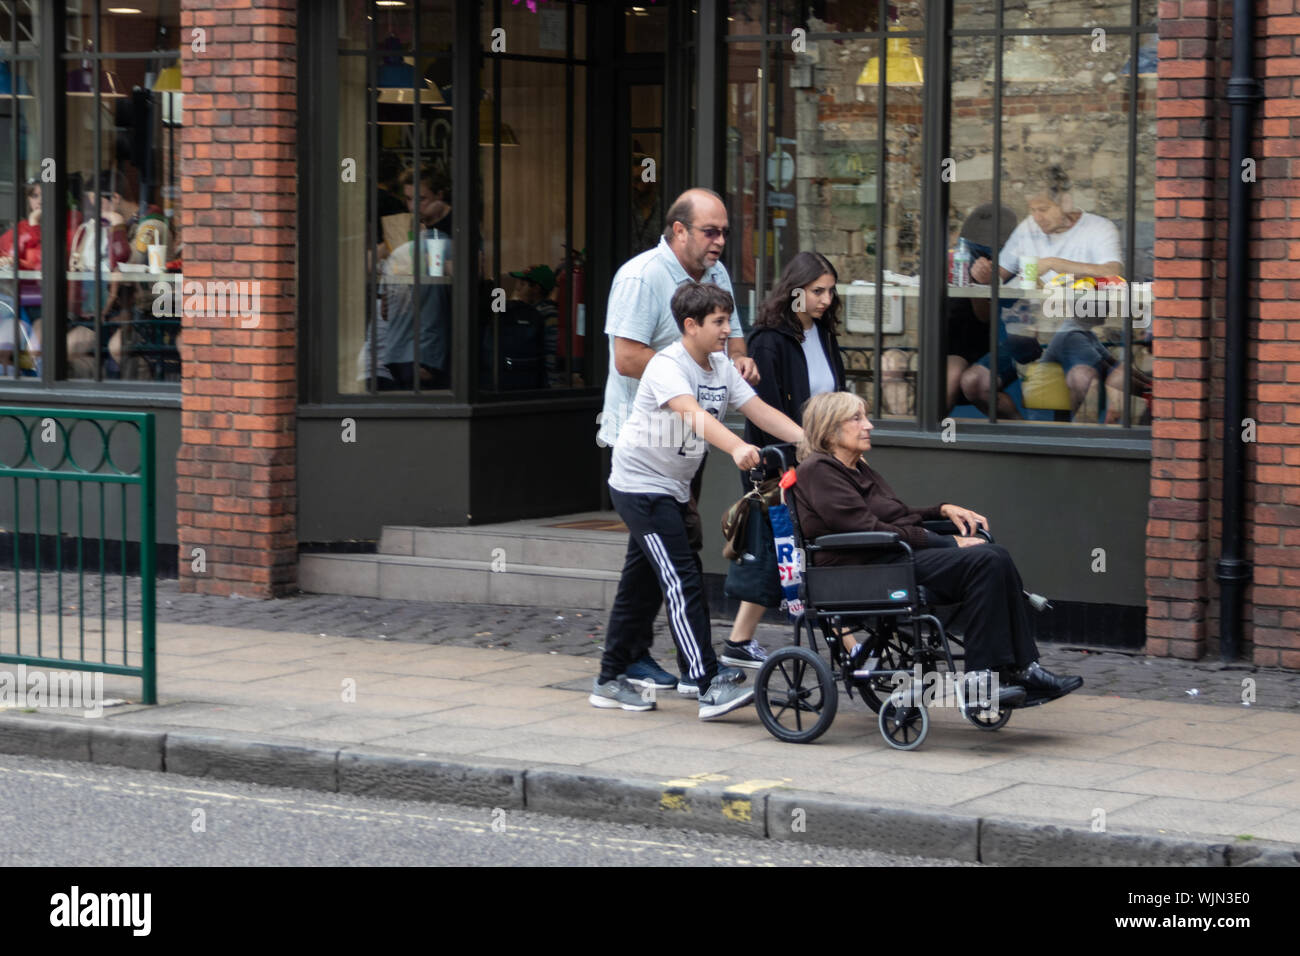 A young boy pushing an elderly lady in a wheelchair in a street past shop windows Stock Photo